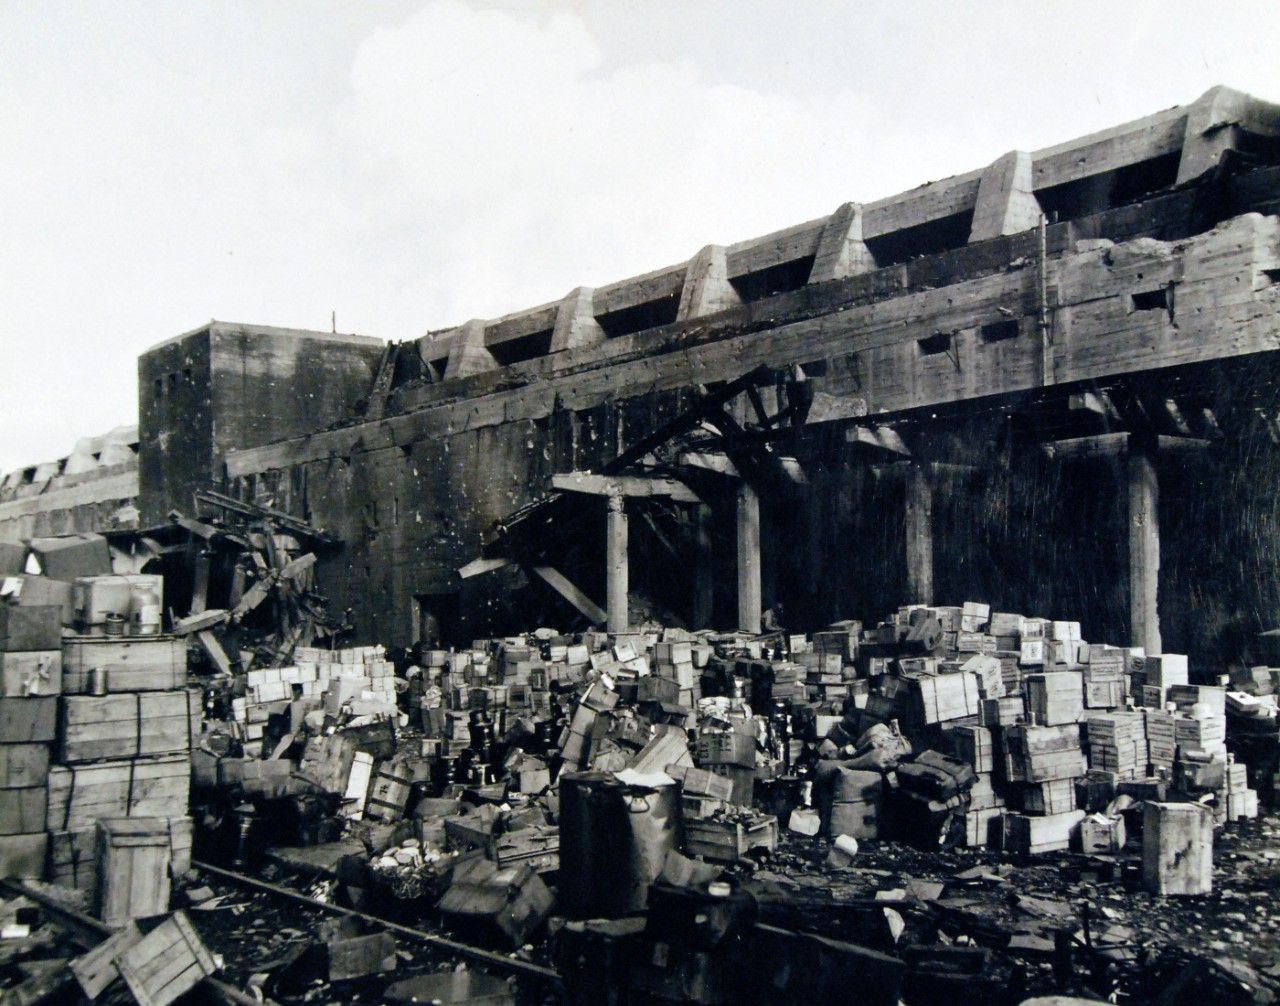 80-G-257479:   Invasion of Southern France, Brest, August-September 1944.   Food ammunition and stores of every kind were found in the rear of the slightly damaged German U-boat pens at Brest, France, following capture of the port by American troops, 27 September 1944.  Official U.S. Navy Photograph, now in the collections of the National Archives.   (2014/10/28).